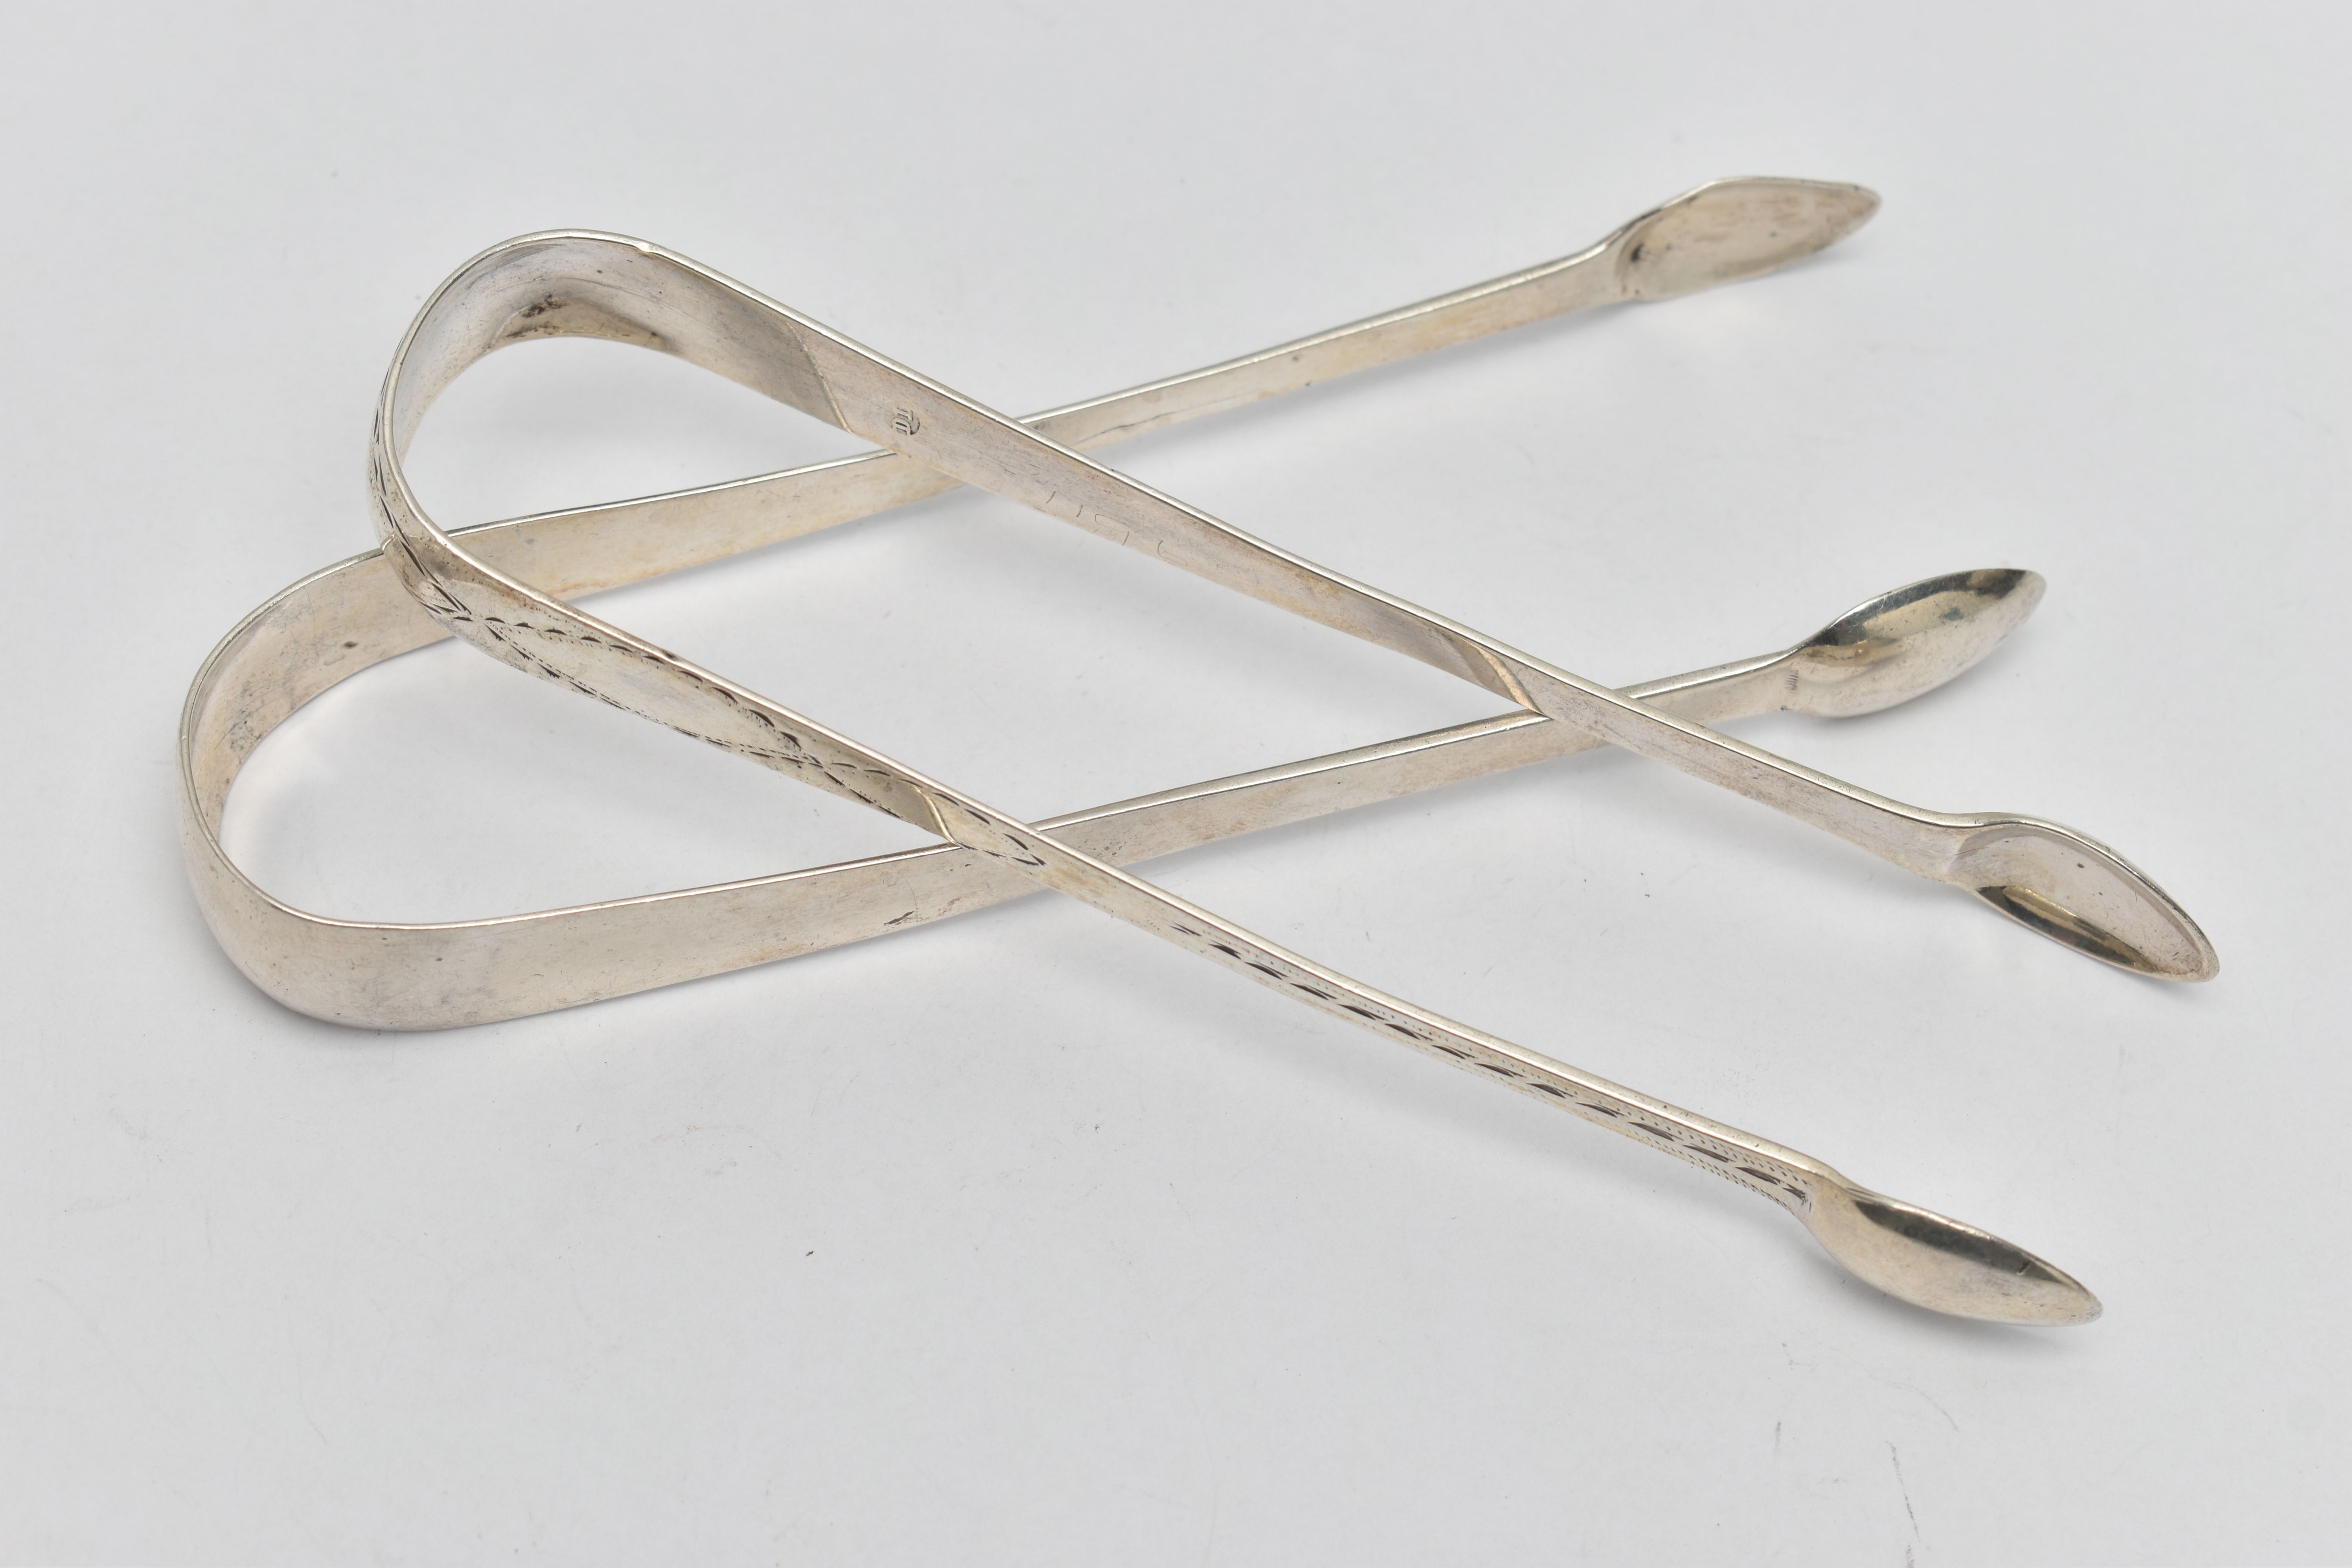 TWO PAIRS OF SILVER SUGAR TONGS, the first pair a plain polished pair of sugar tongs, hallmarked '